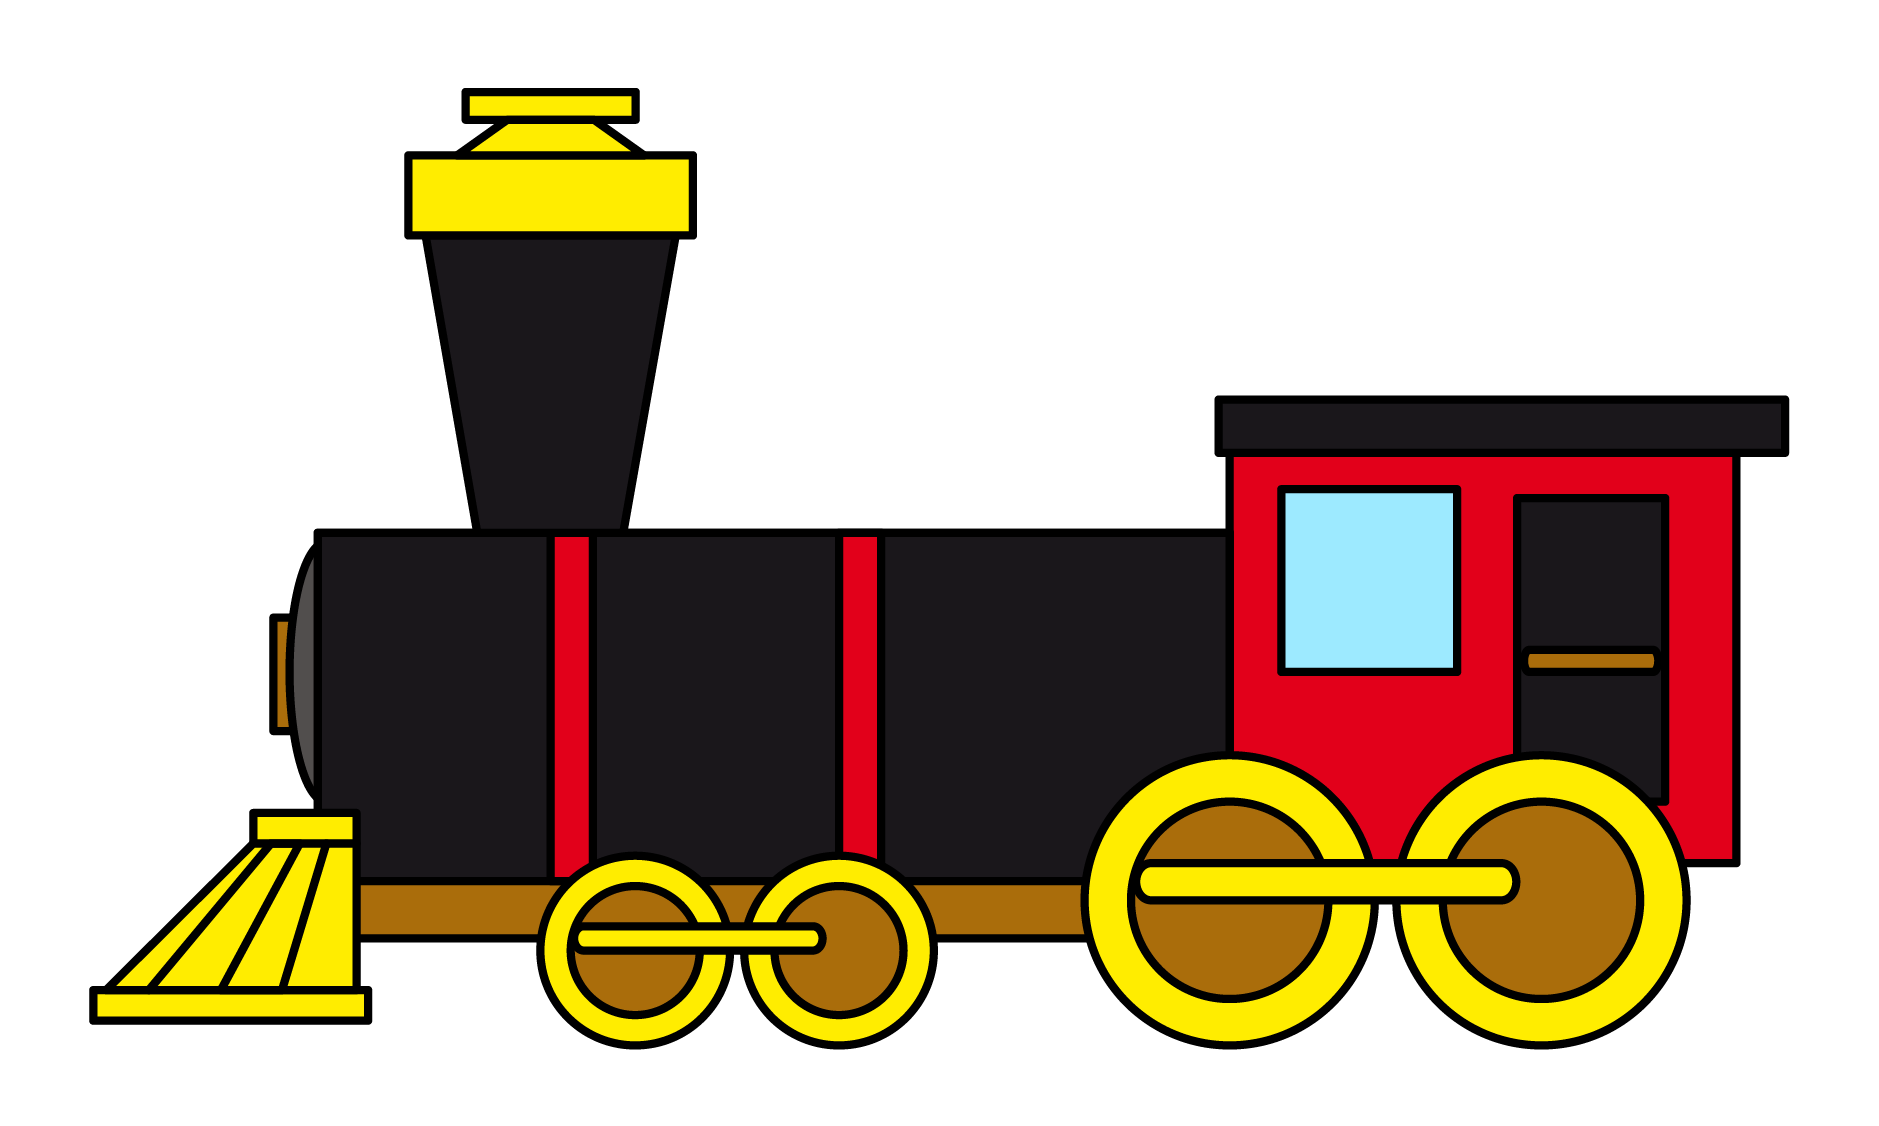 Image of Train Clip Art #681, Toy Trains Clipart Free - Clipartoons